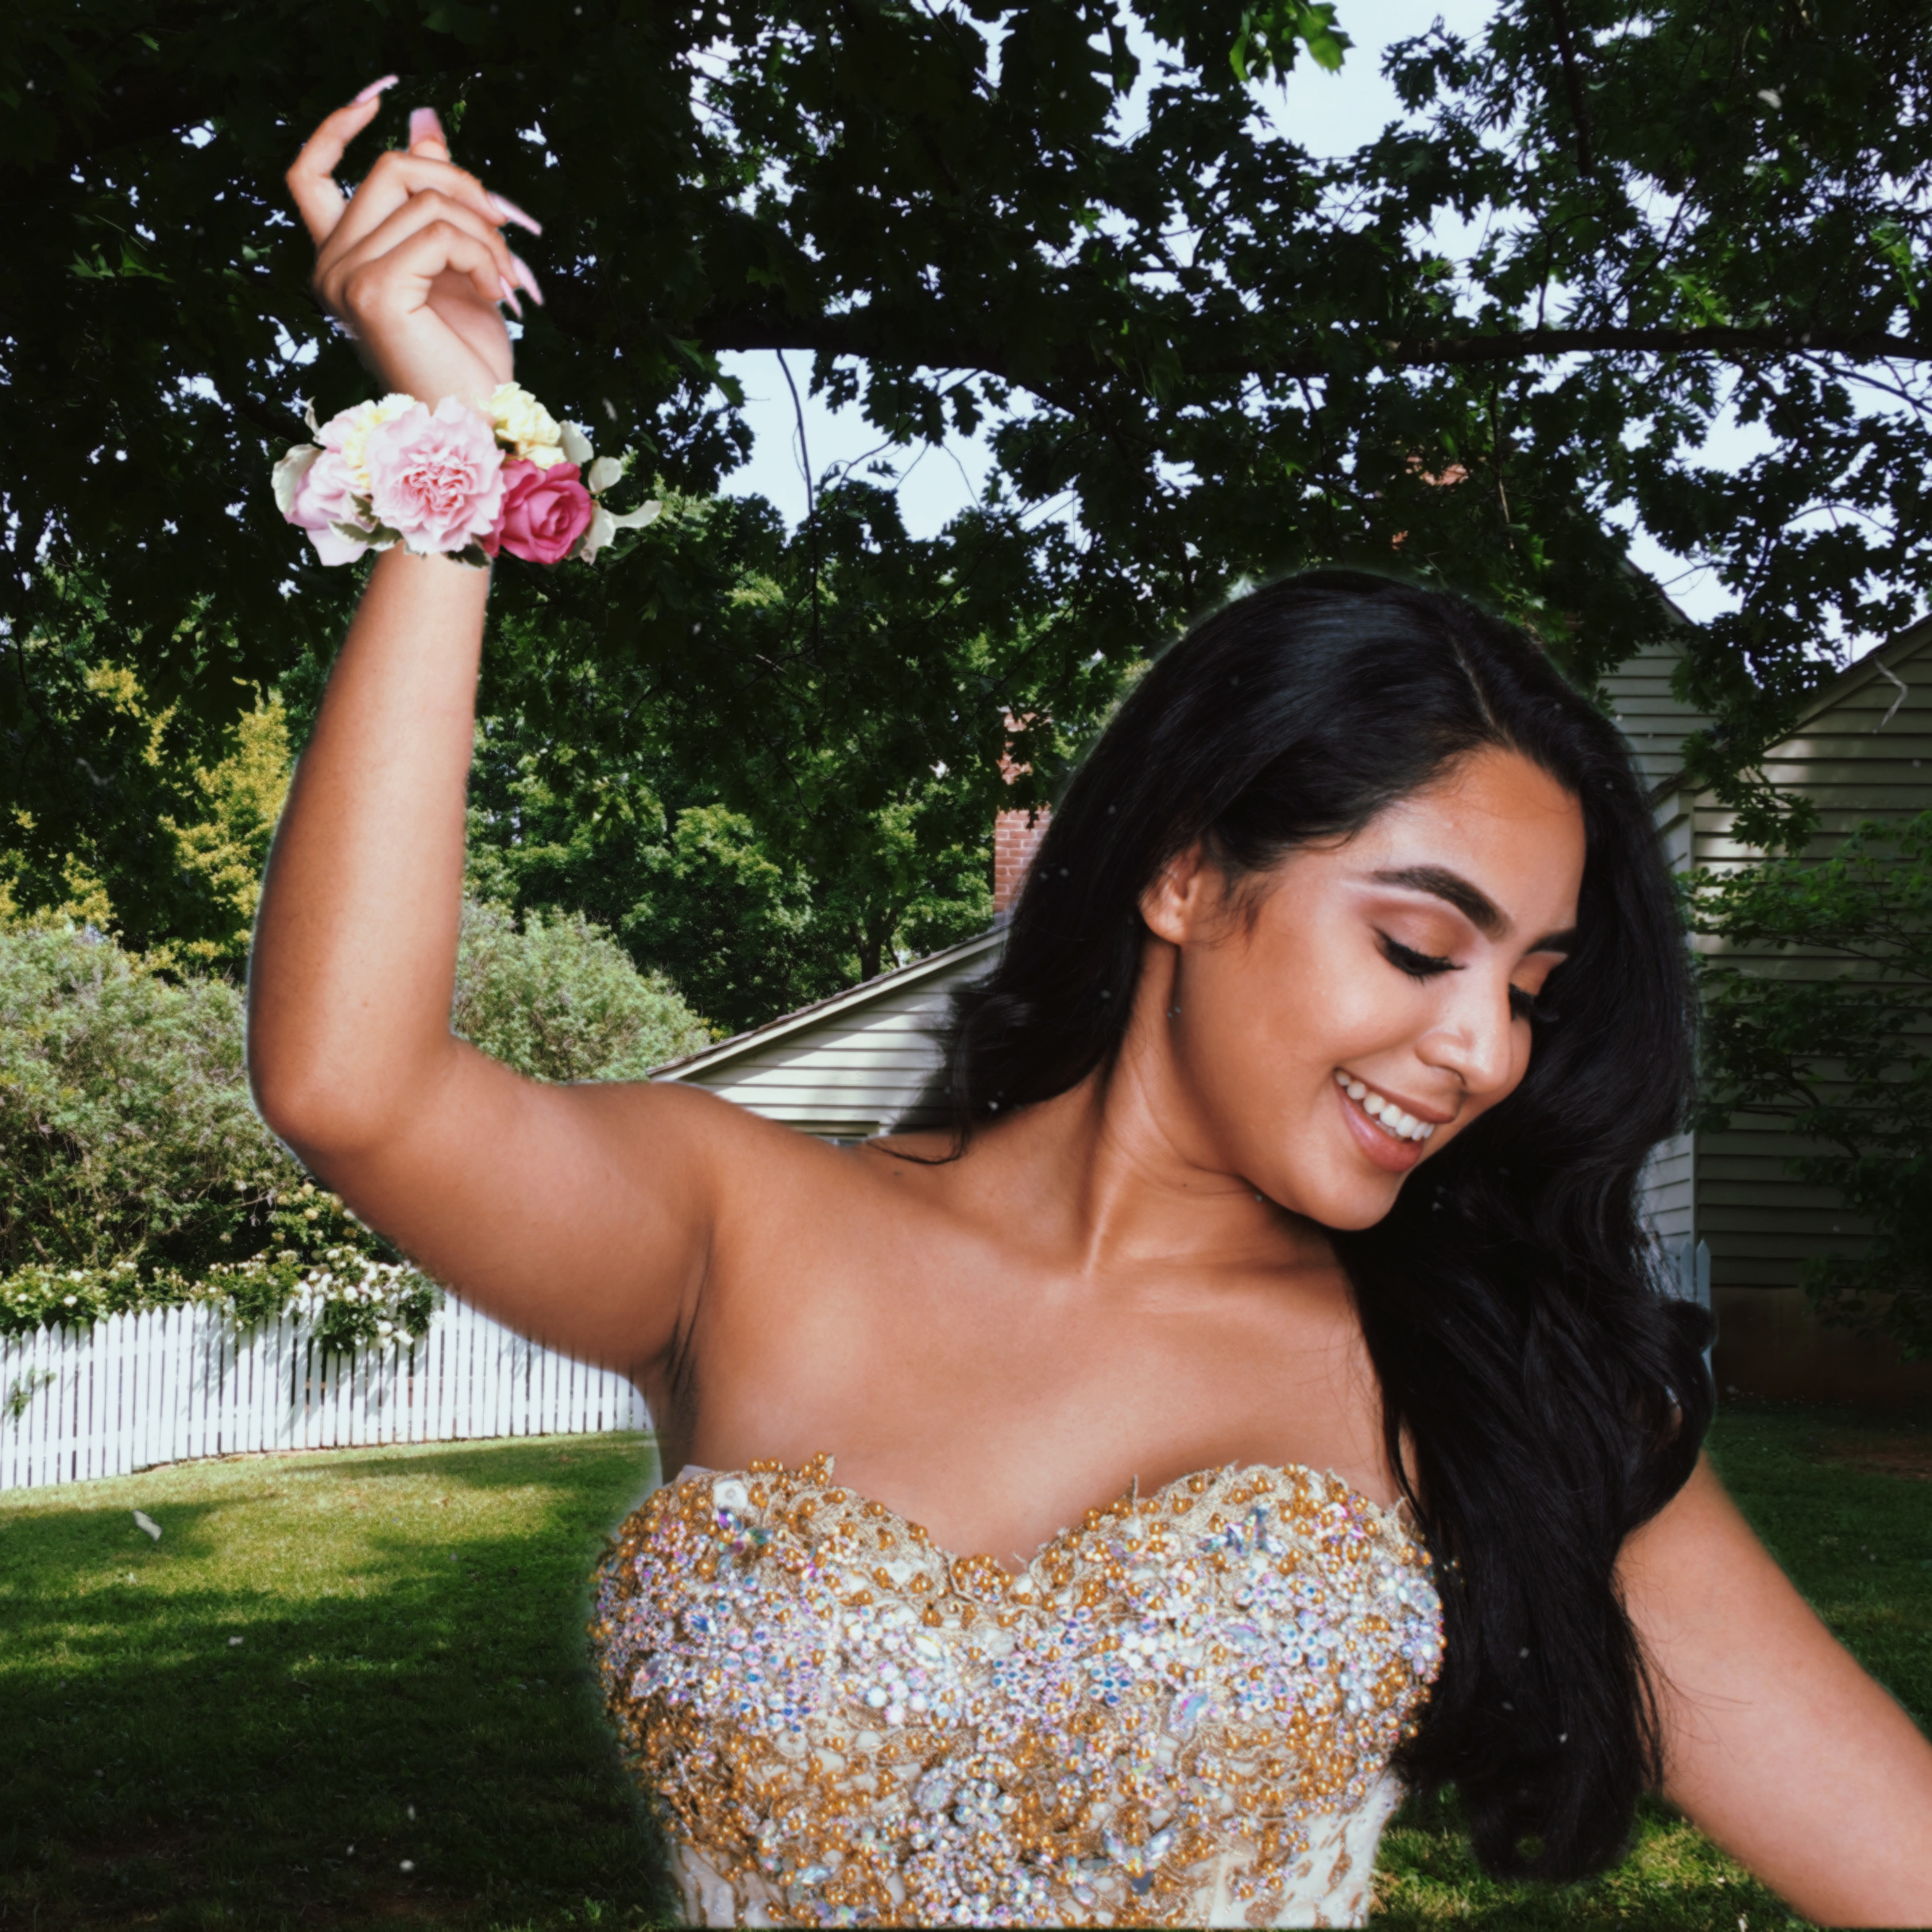 smiling brunette girl in prom party dress with a nice corsage around her wrist